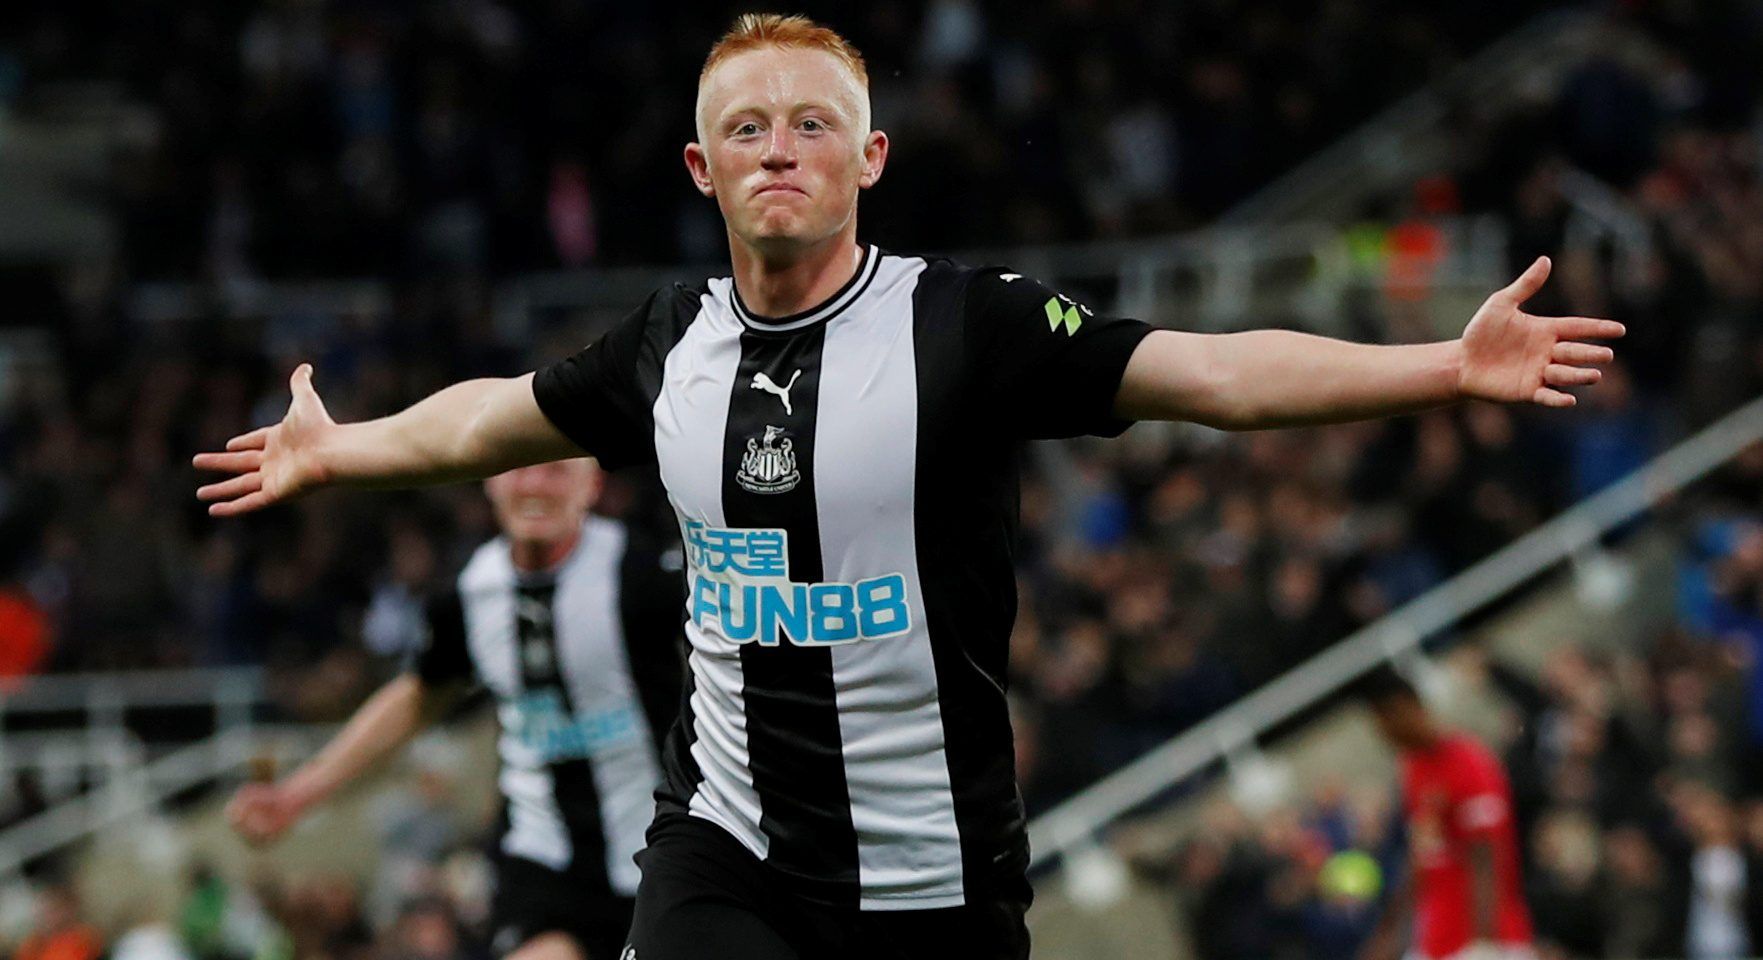 Soccer Football - Premier League - Newcastle United v Manchester United - St James' Park, Newcastle, Britain - October 6, 2019  Newcastle United's Matthew Longstaff celebrates scoring their first goal   Action Images via Reuters/Lee Smith  EDITORIAL USE ONLY. No use with unauthorized audio, video, data, fixture lists, club/league logos or 